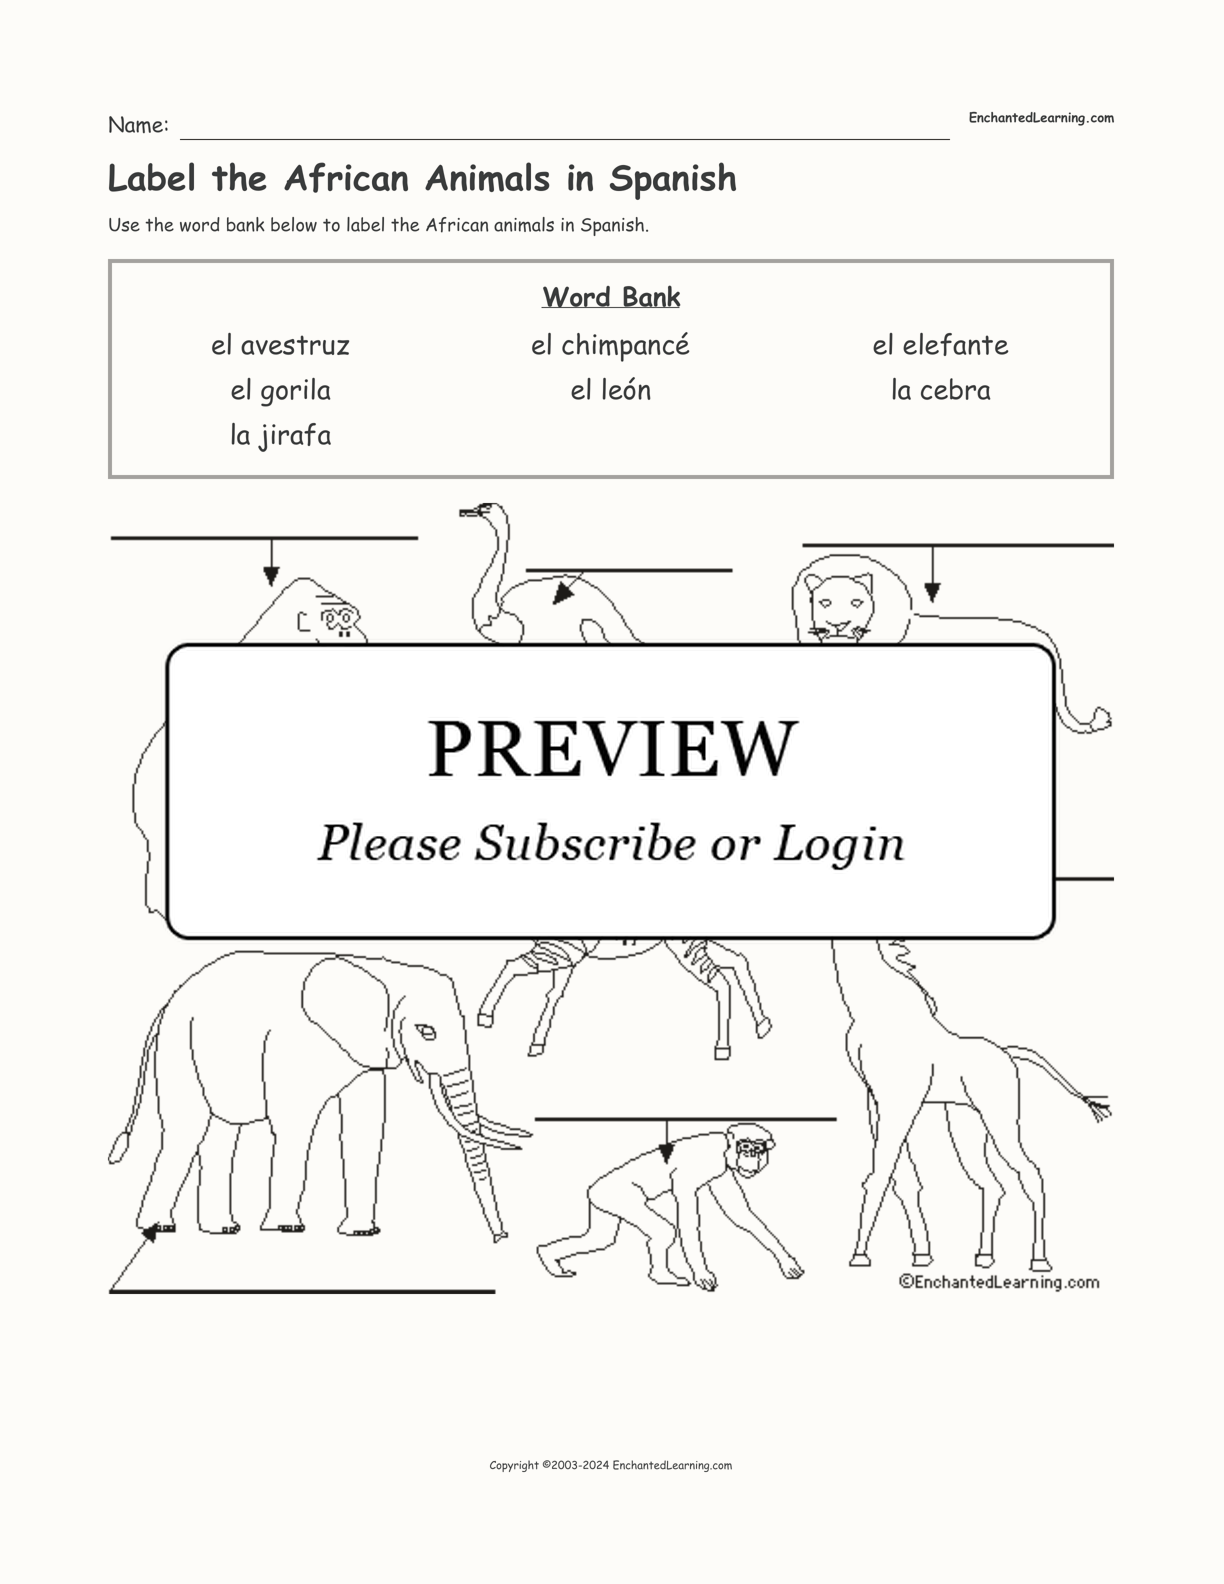 Label the African Animals in Spanish interactive worksheet page 1